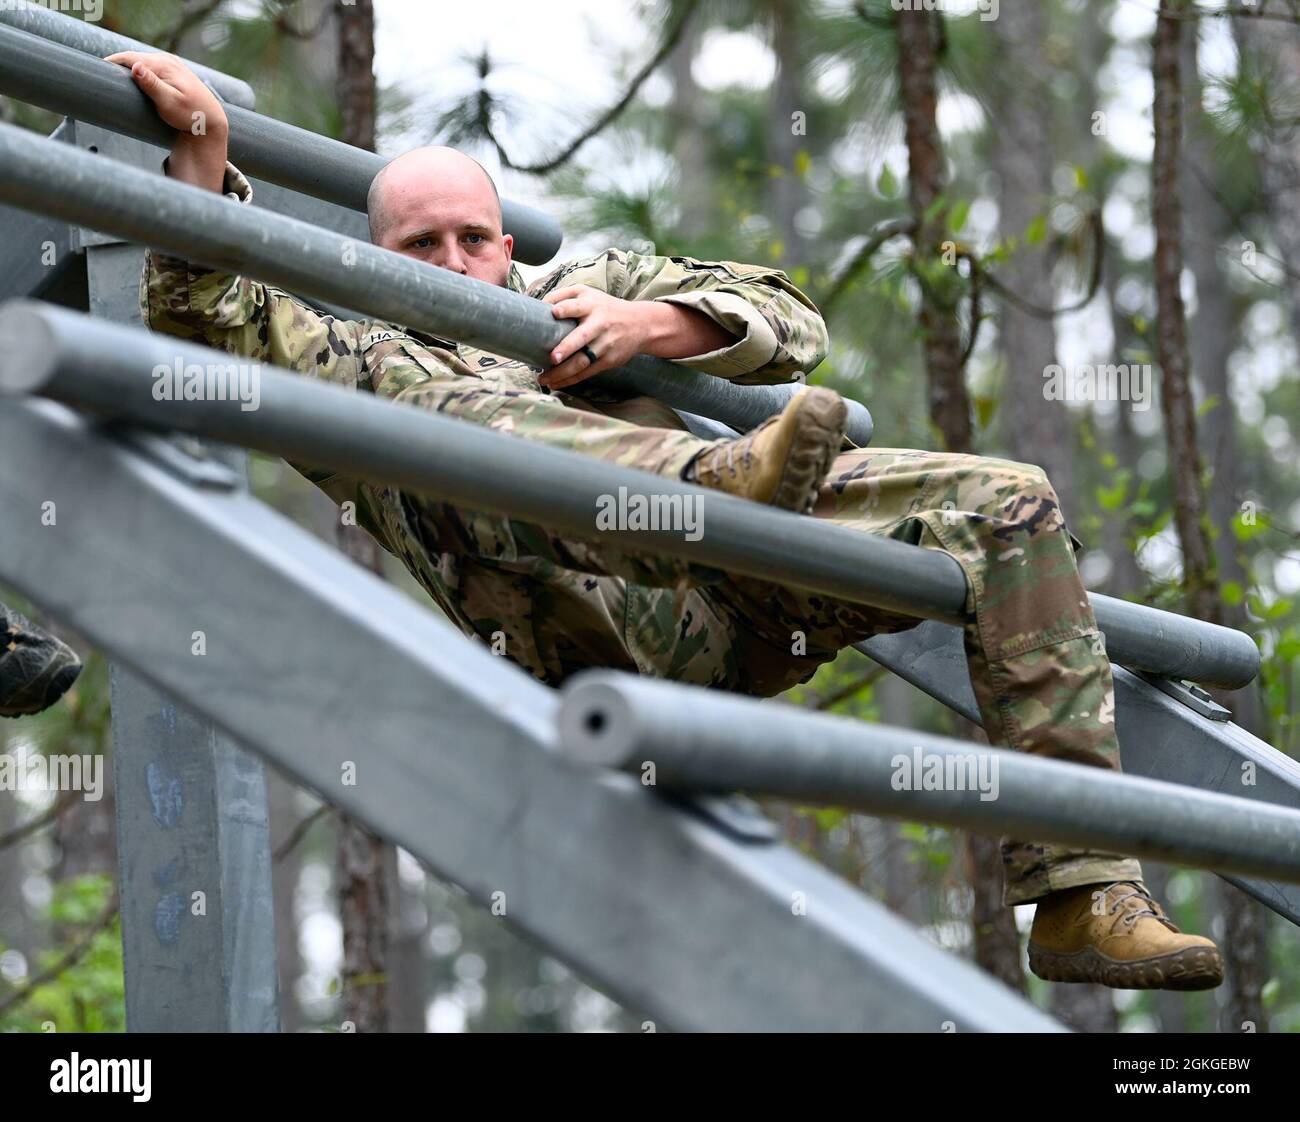 A Soldier from Support Battalion, 1st Special Warfare Training Group (Airborne) negotiates an obstacle during the battalion's Commander's Cup competition at Fort Bragg, North Carolina April 15, 2021. The Soldiers from each company competed in a ruck march, obstacle course, land navigation, Jeopardy-themed trivia contest and stress shoot with pistols and rifles. Stock Photo